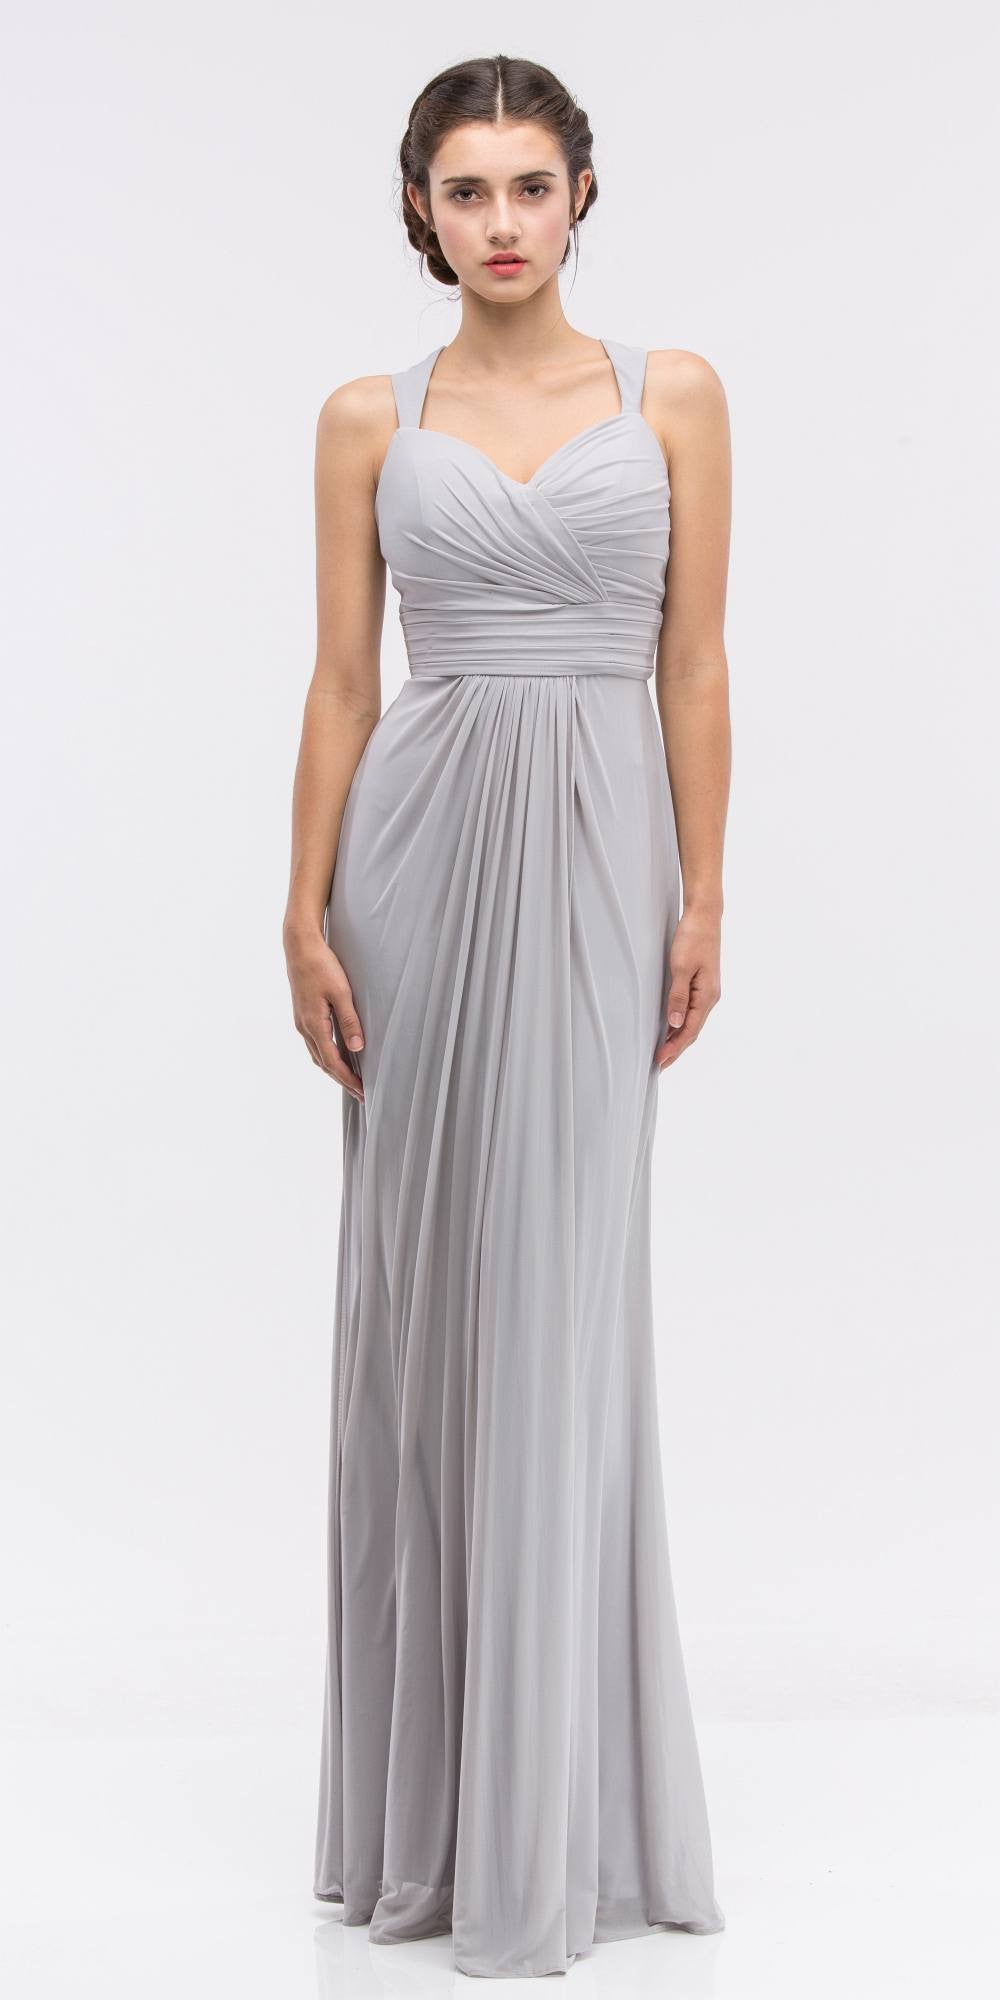 Ruched Sweetheart Neckline Floor Length Bridesmaids Dress Silver